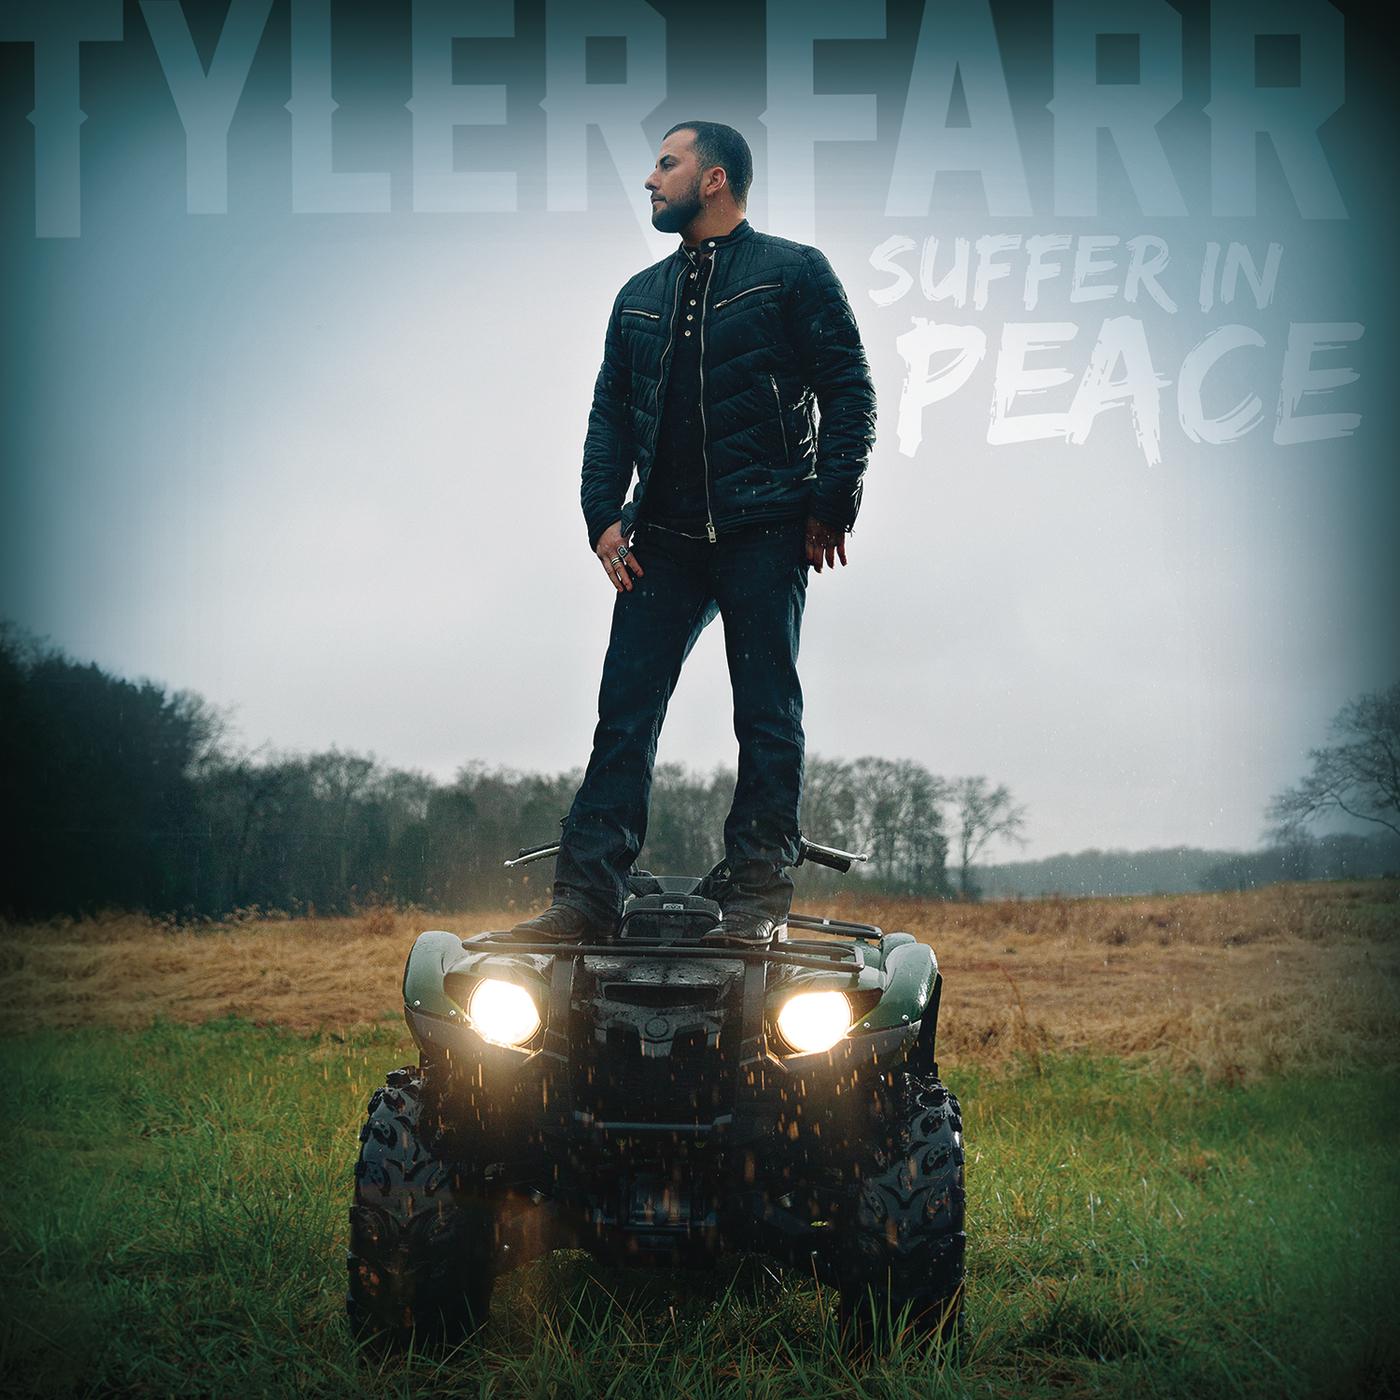 Tyler Farr - I Don't Even Want This Beer